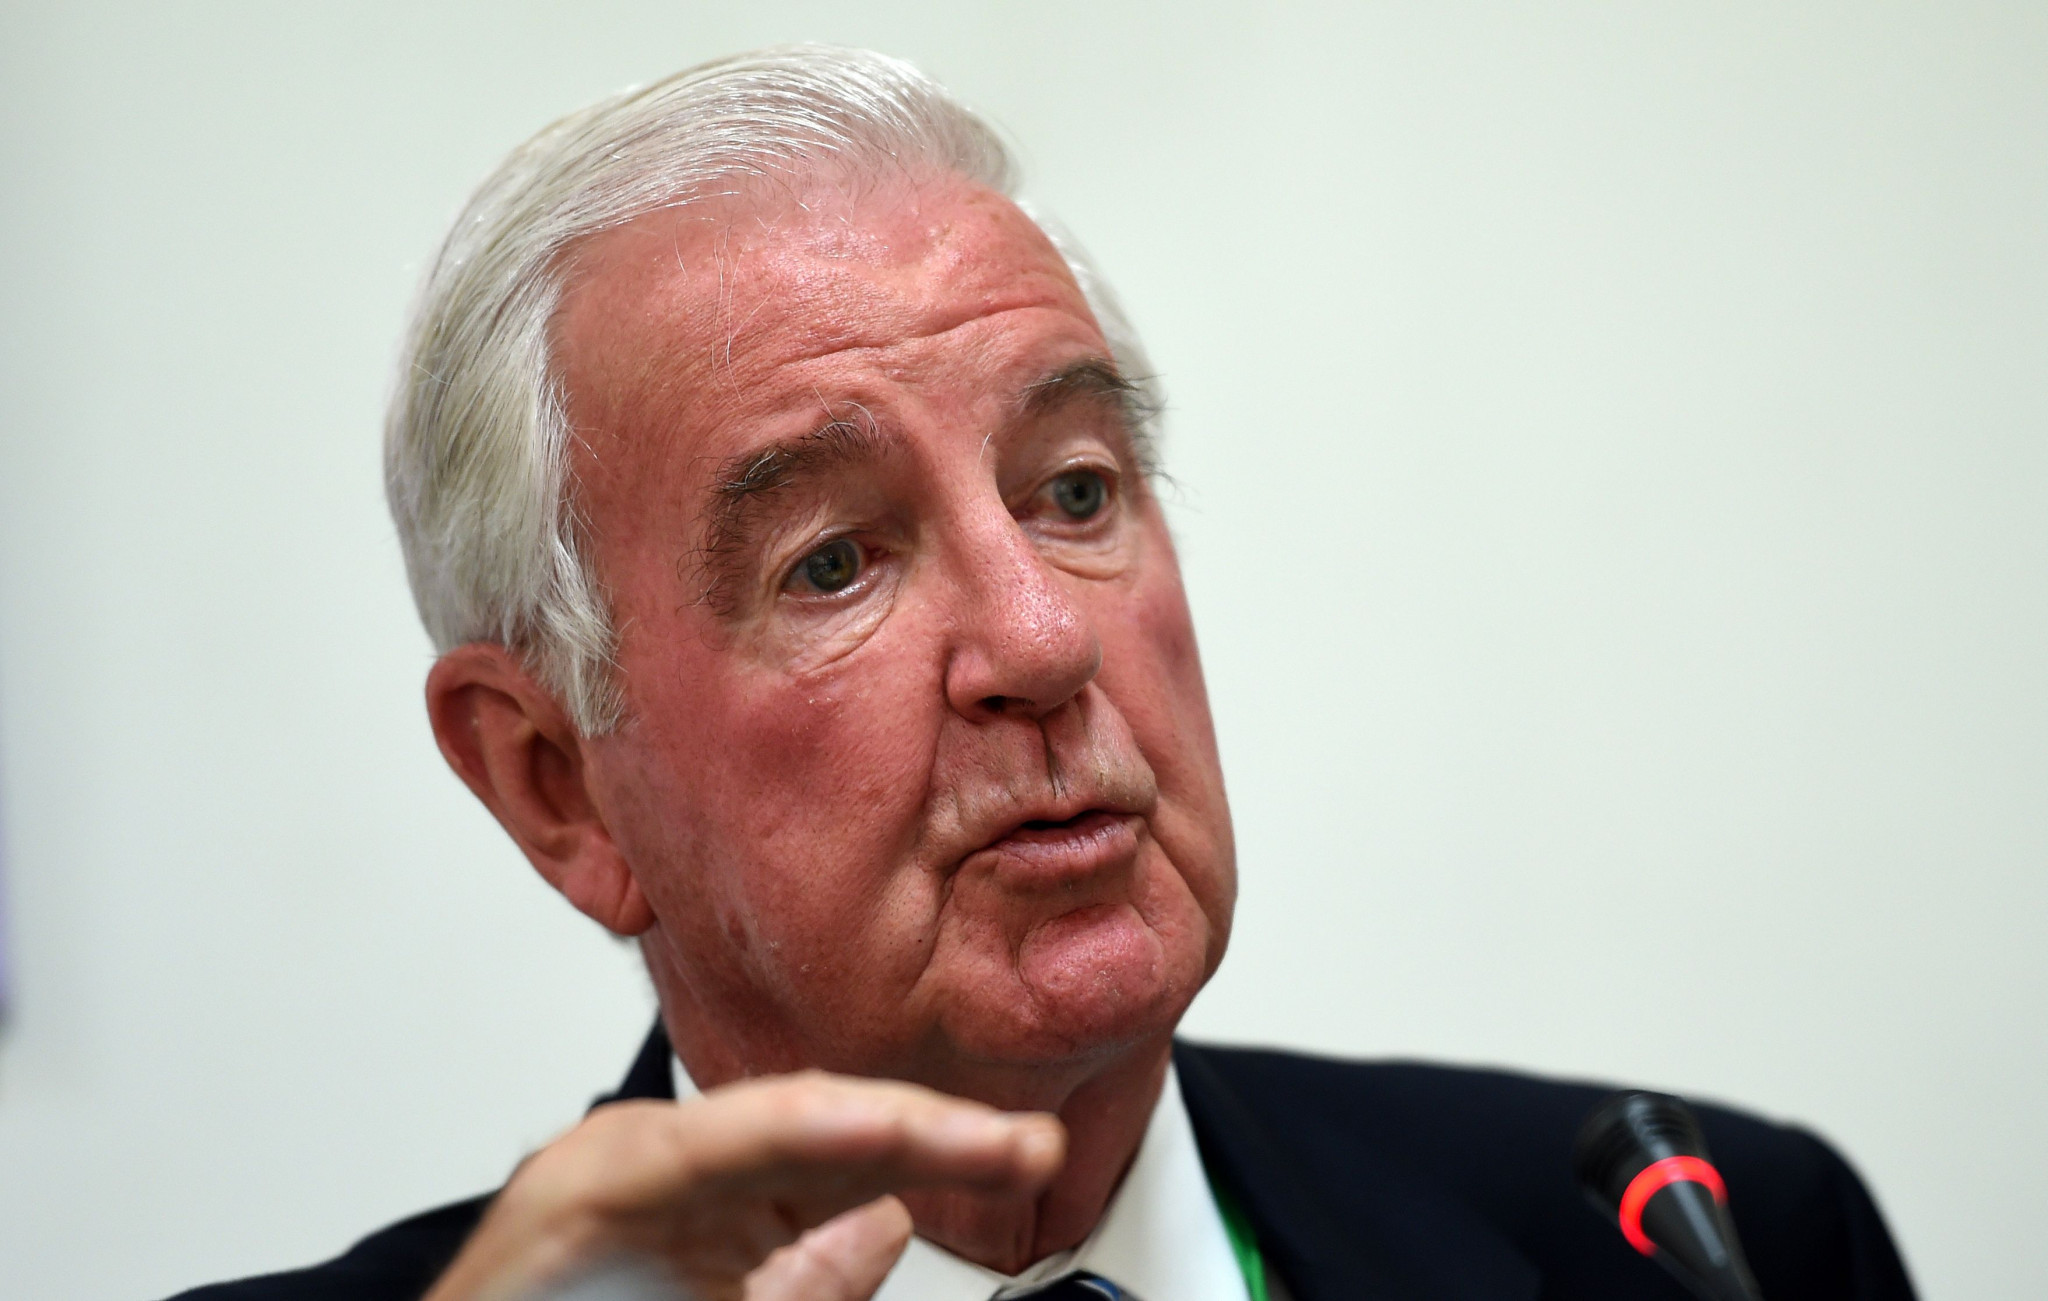 WADA President left frustrated after Russia fails to respond to suggestions aimed at "purifying" compliance criteria